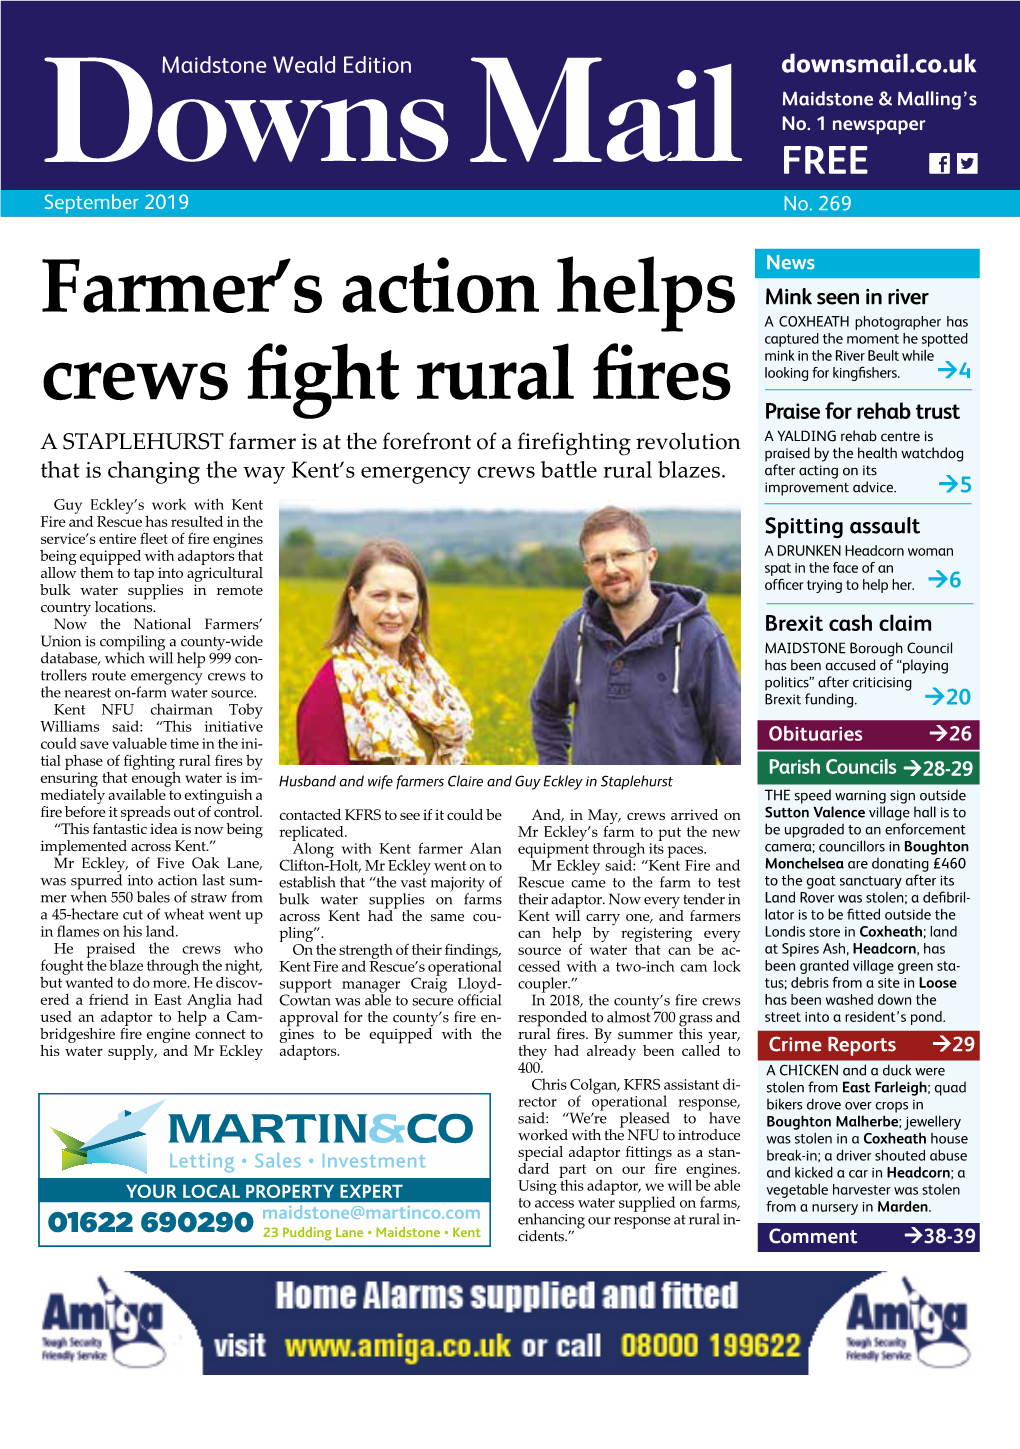 Farmer's Action Helps Crews Fight Rural Fires